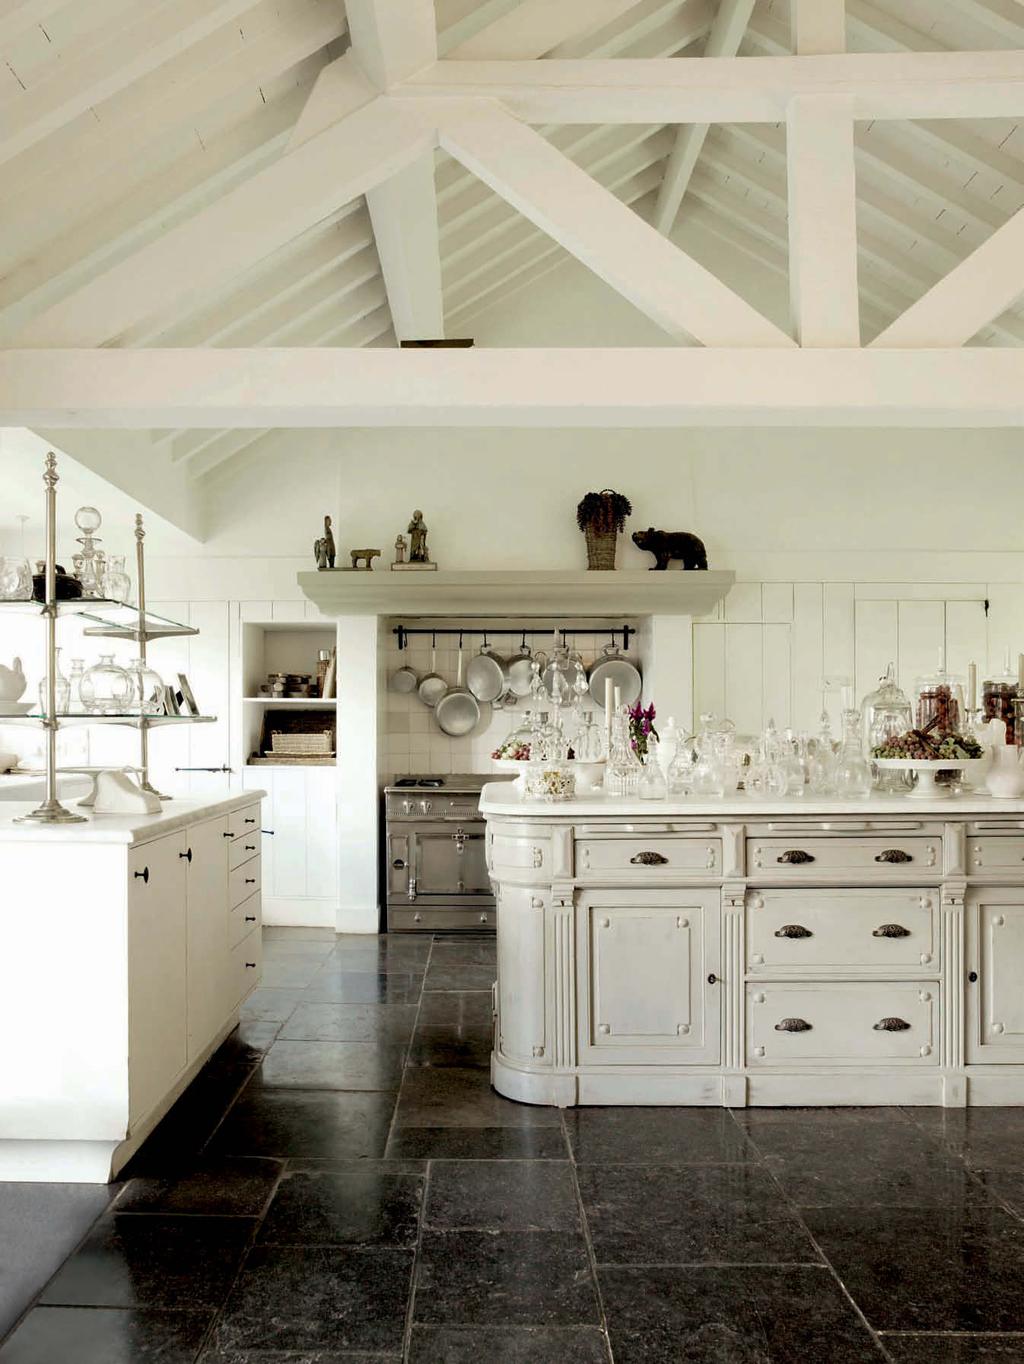 The family kitchen is a harmonious mix of old and new My home is a